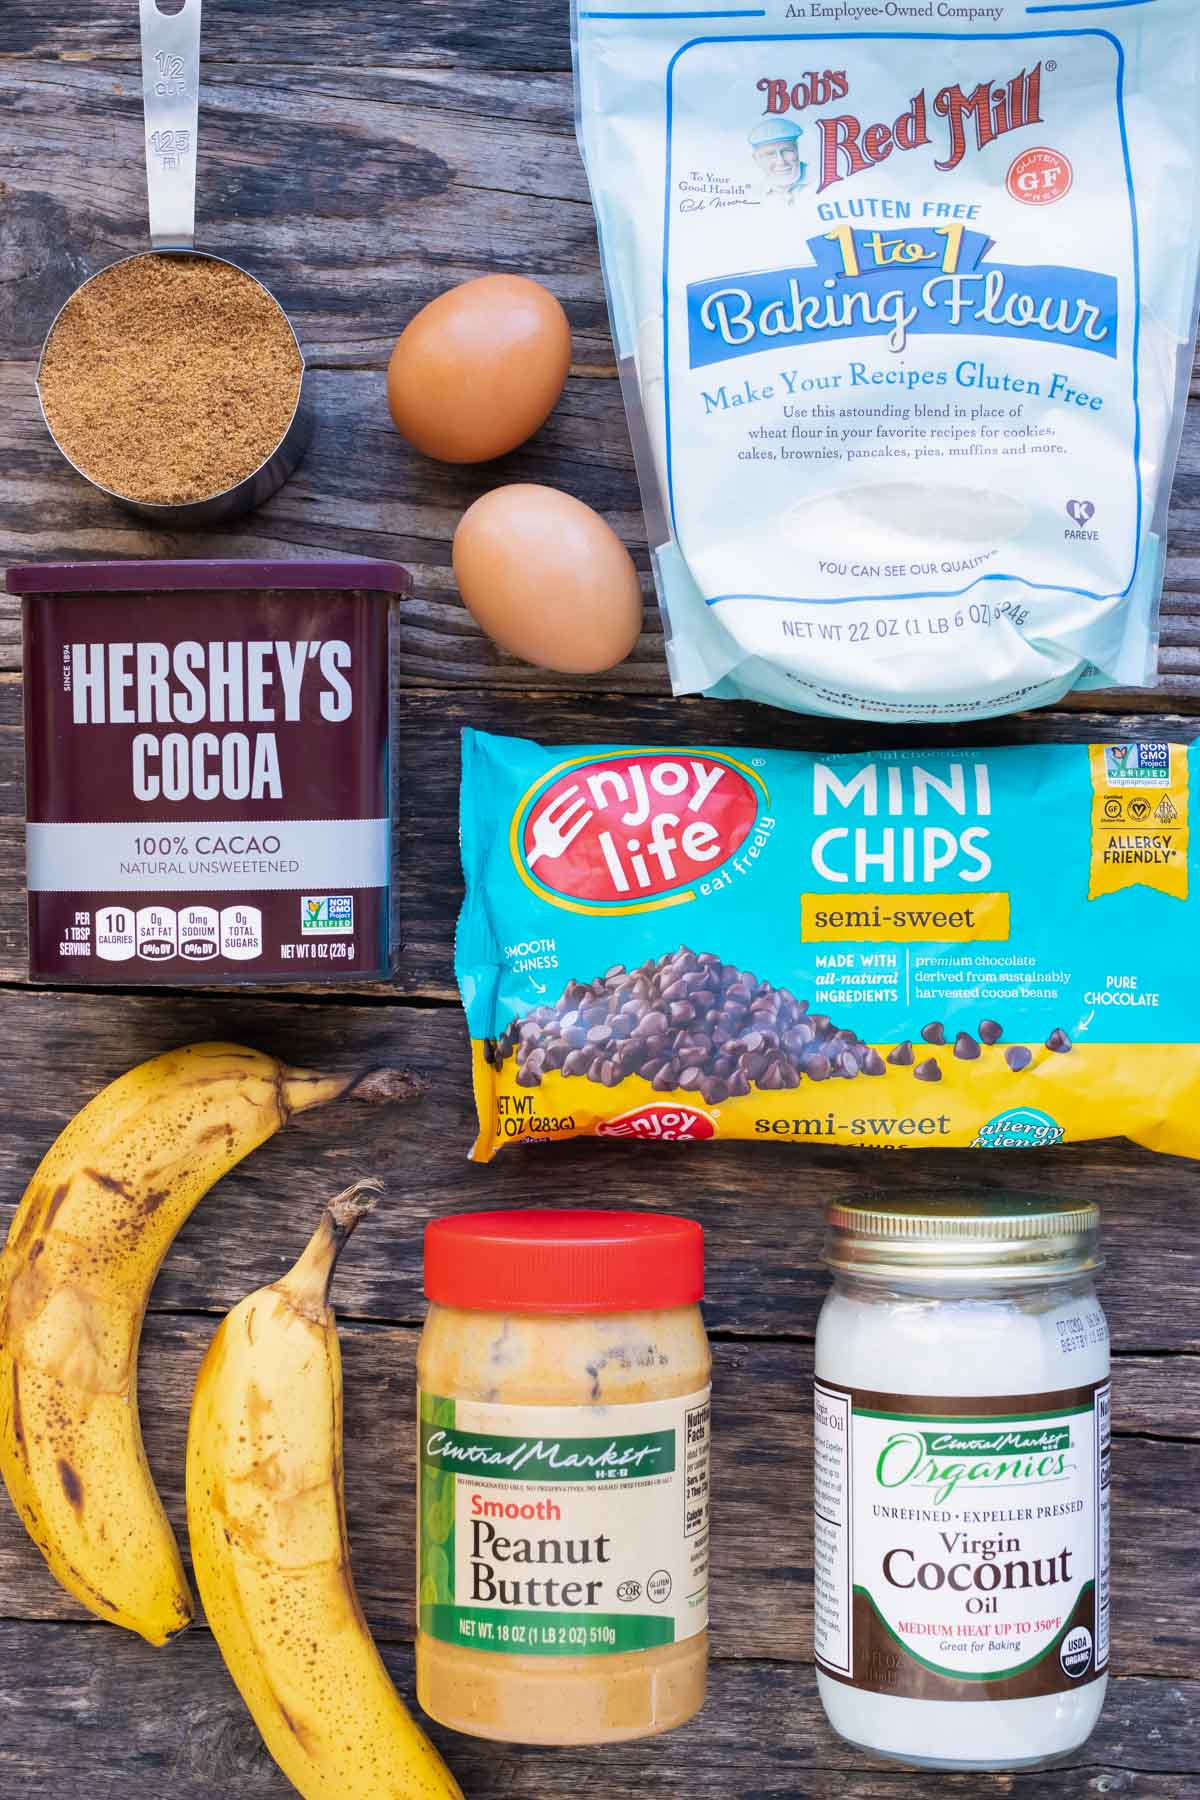 Chocolate chips, mashed bananas, peanut butter, coconut oil, cocoa powder and other ingredients are used in these double chocolate banana muffins.